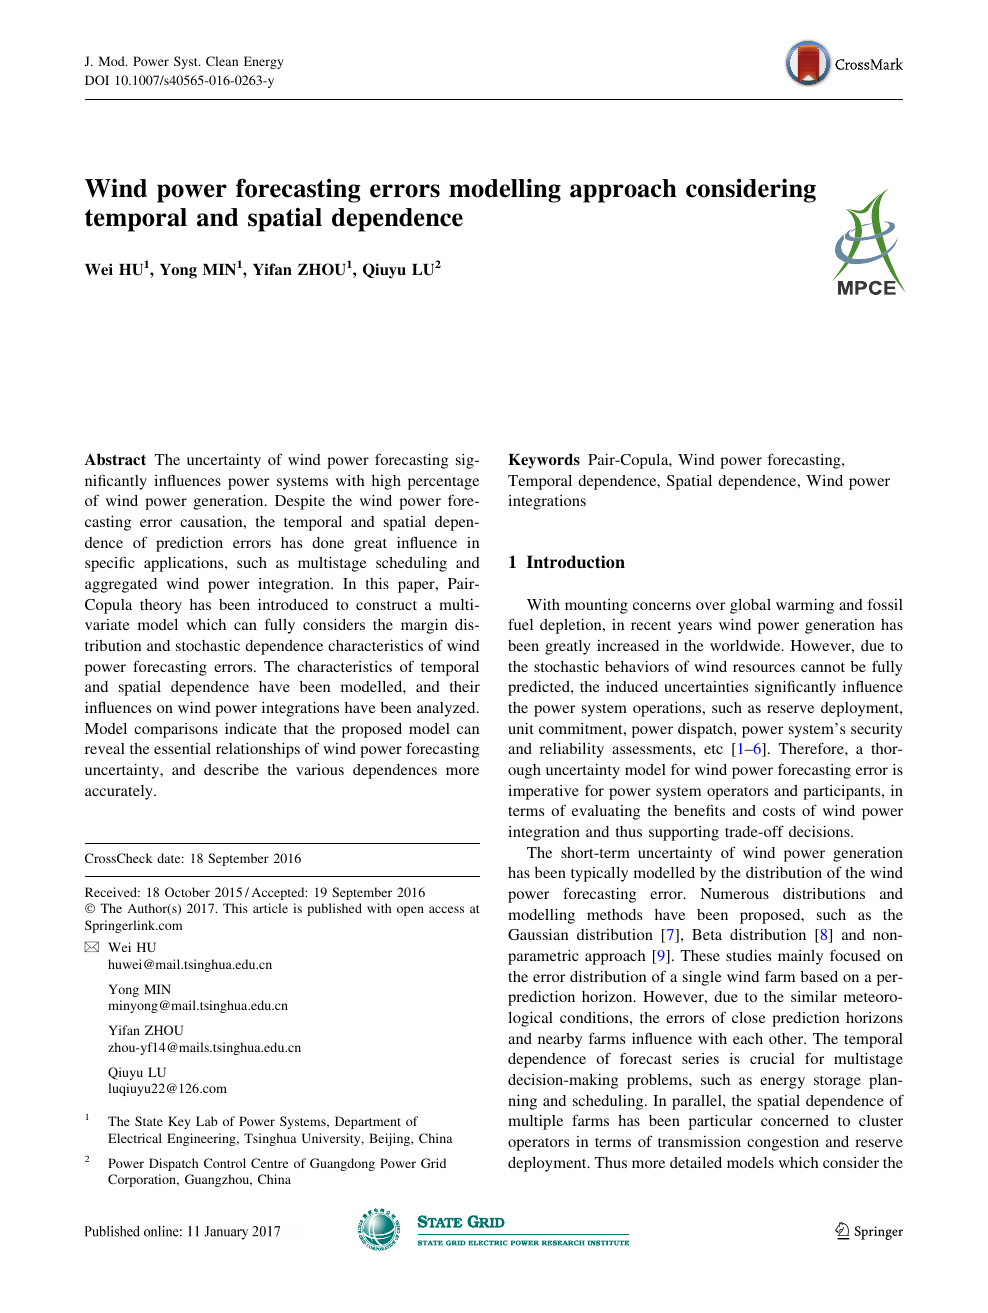 Wind Power Forecasting Errors Modelling Approach Considering Temporal And Spatial Dependence Topic Of Research Paper In Electrical Engineering Electronic Engineering Information Engineering Download Scholarly Article Pdf And Read For Free On